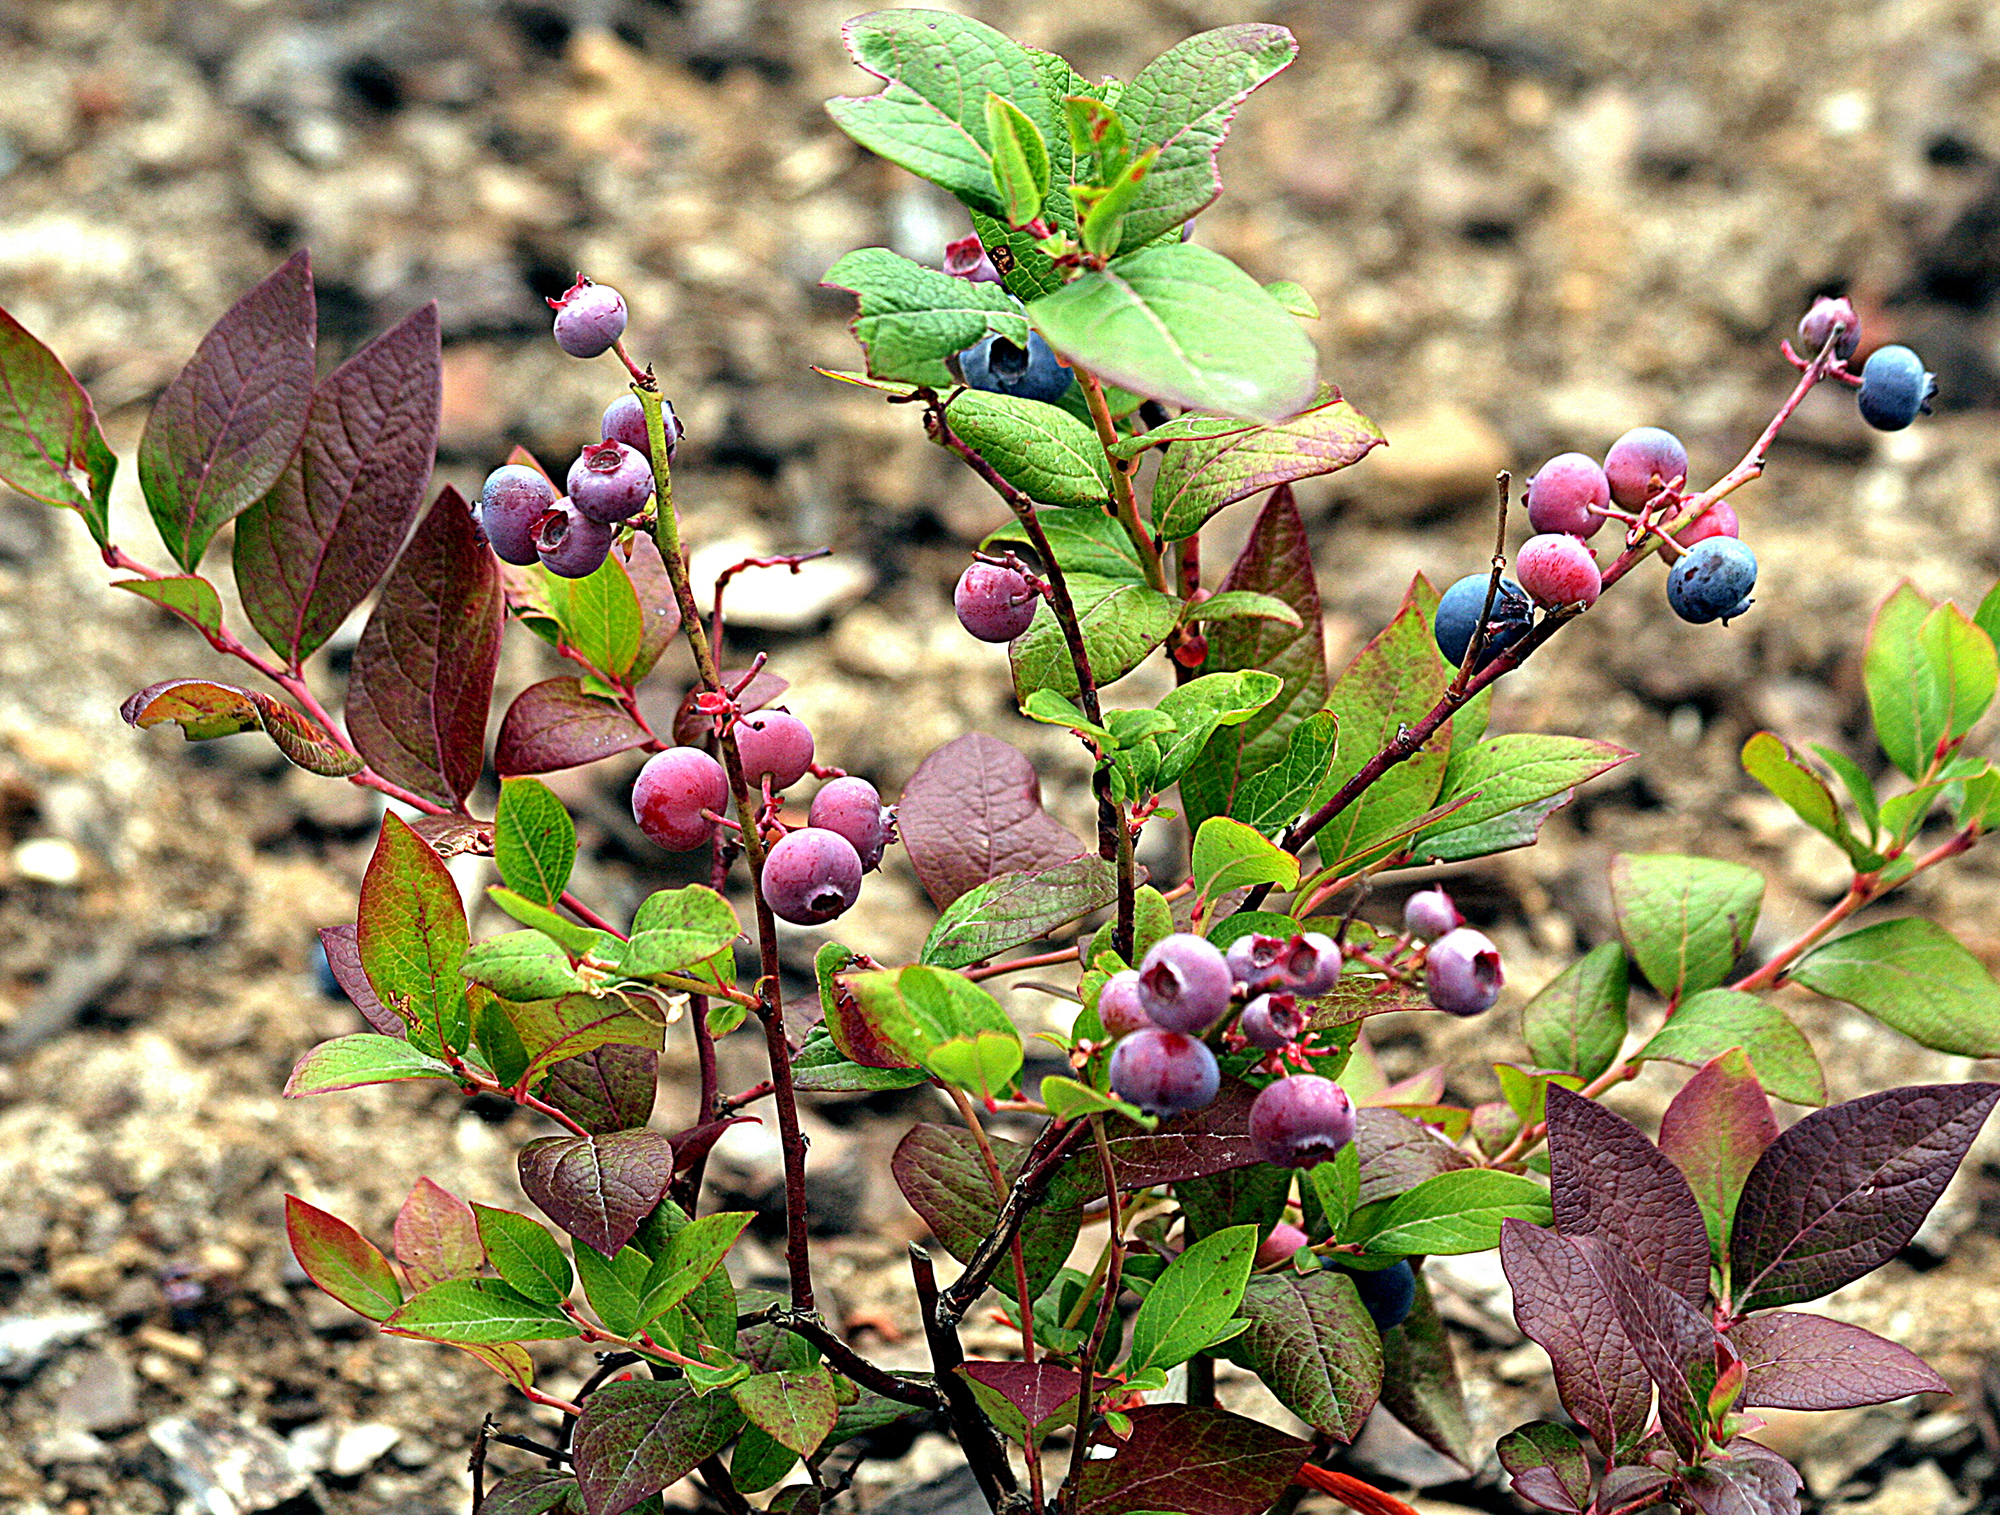 A short bush laden with ripe blueberries.